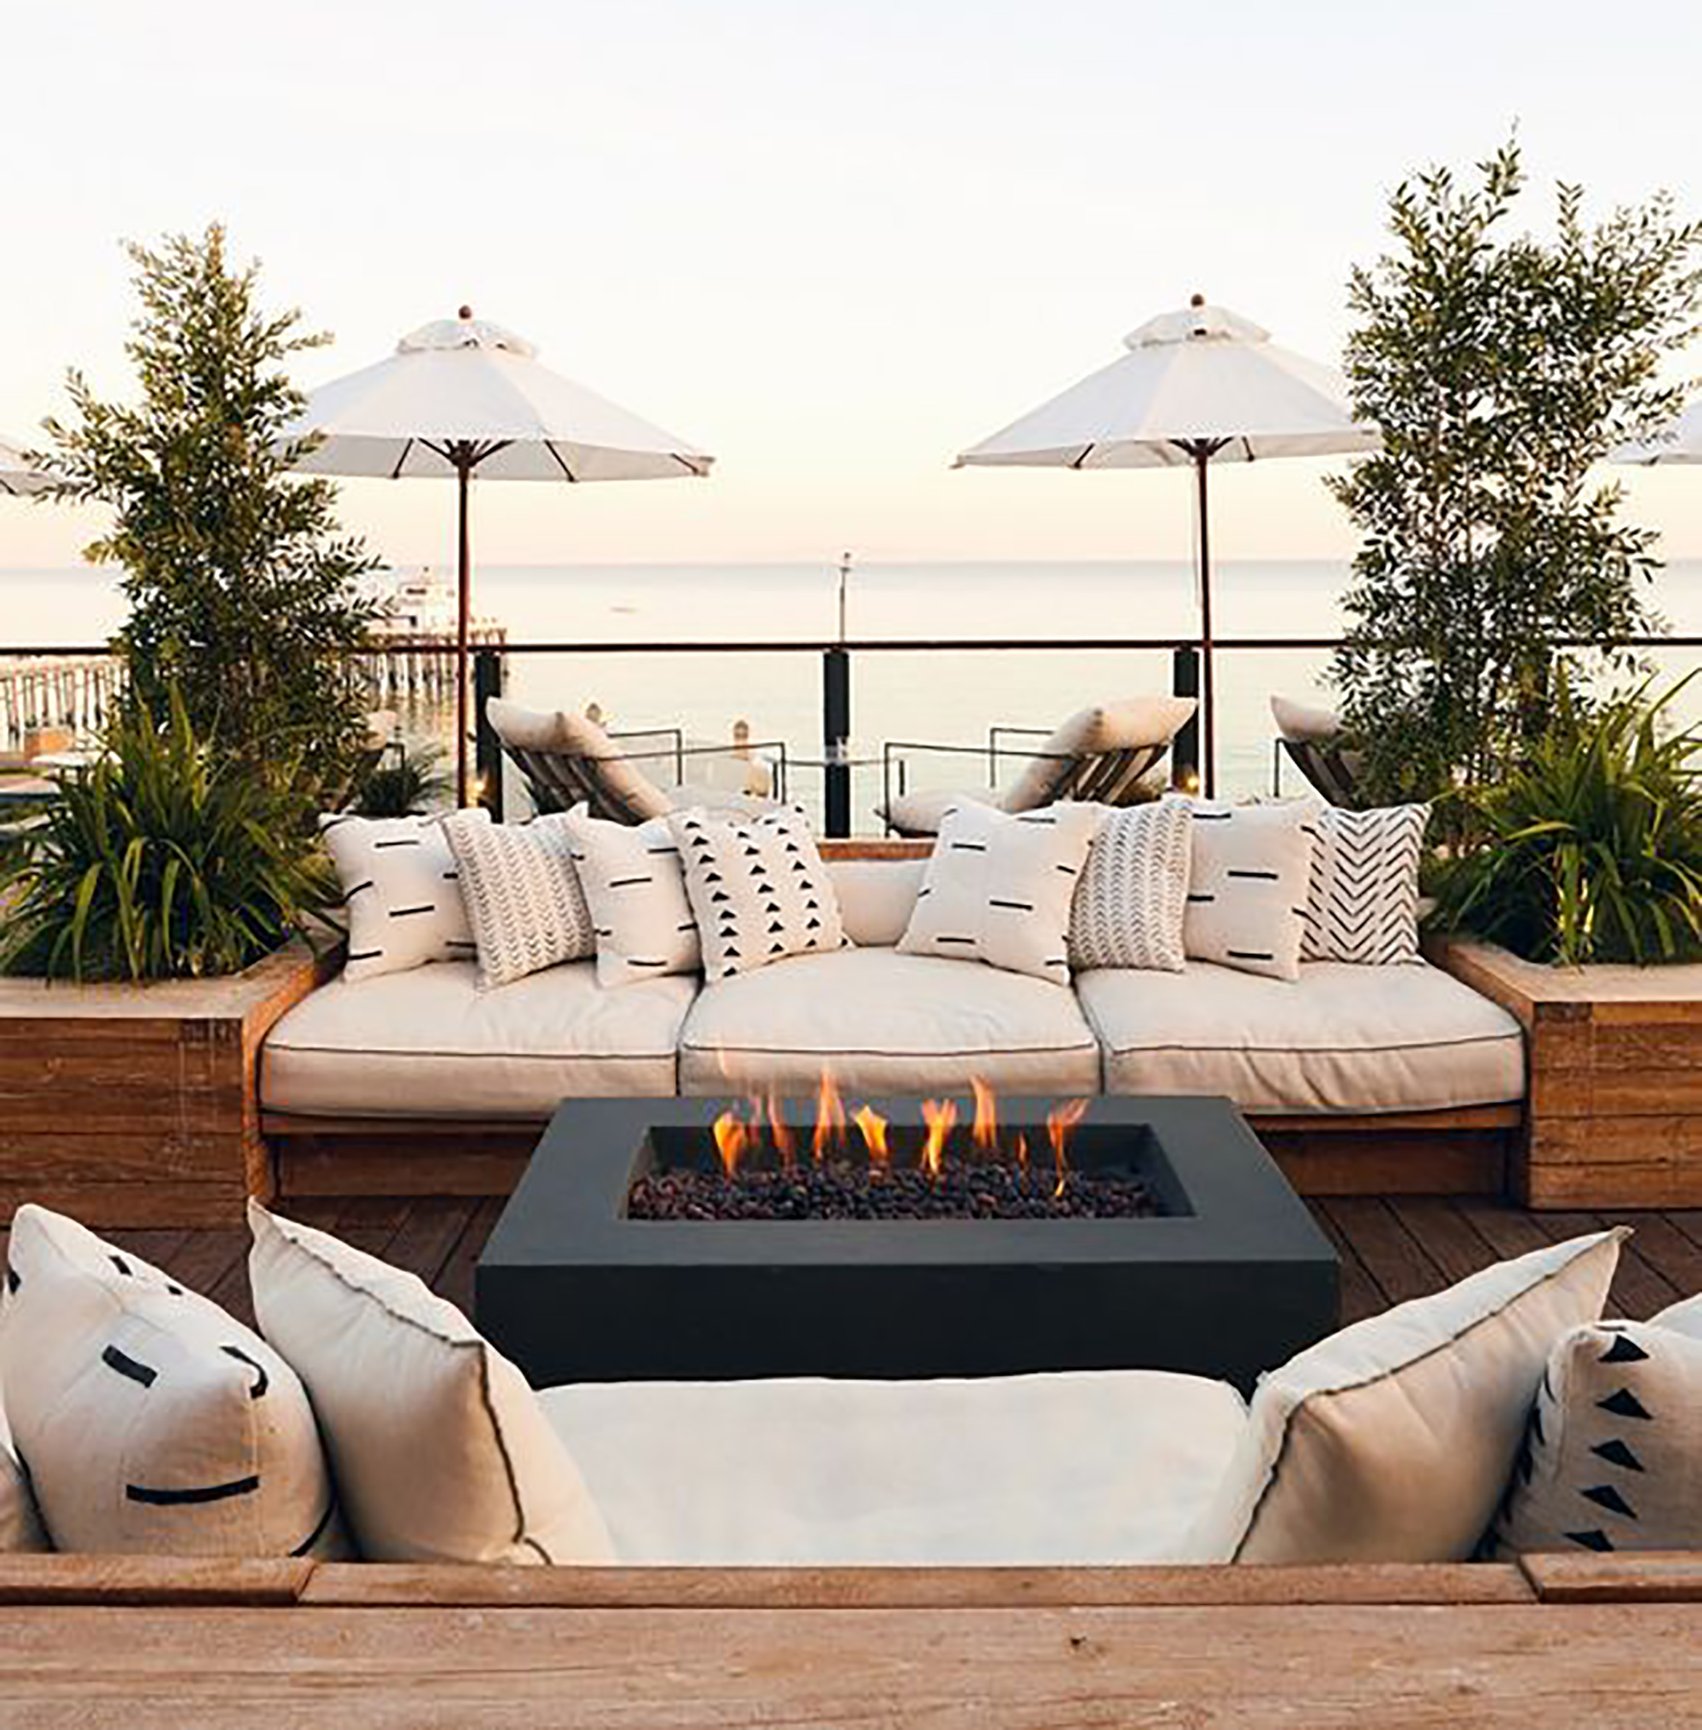 Designing Your Outdoor Living Space To Be An Extension Of Your